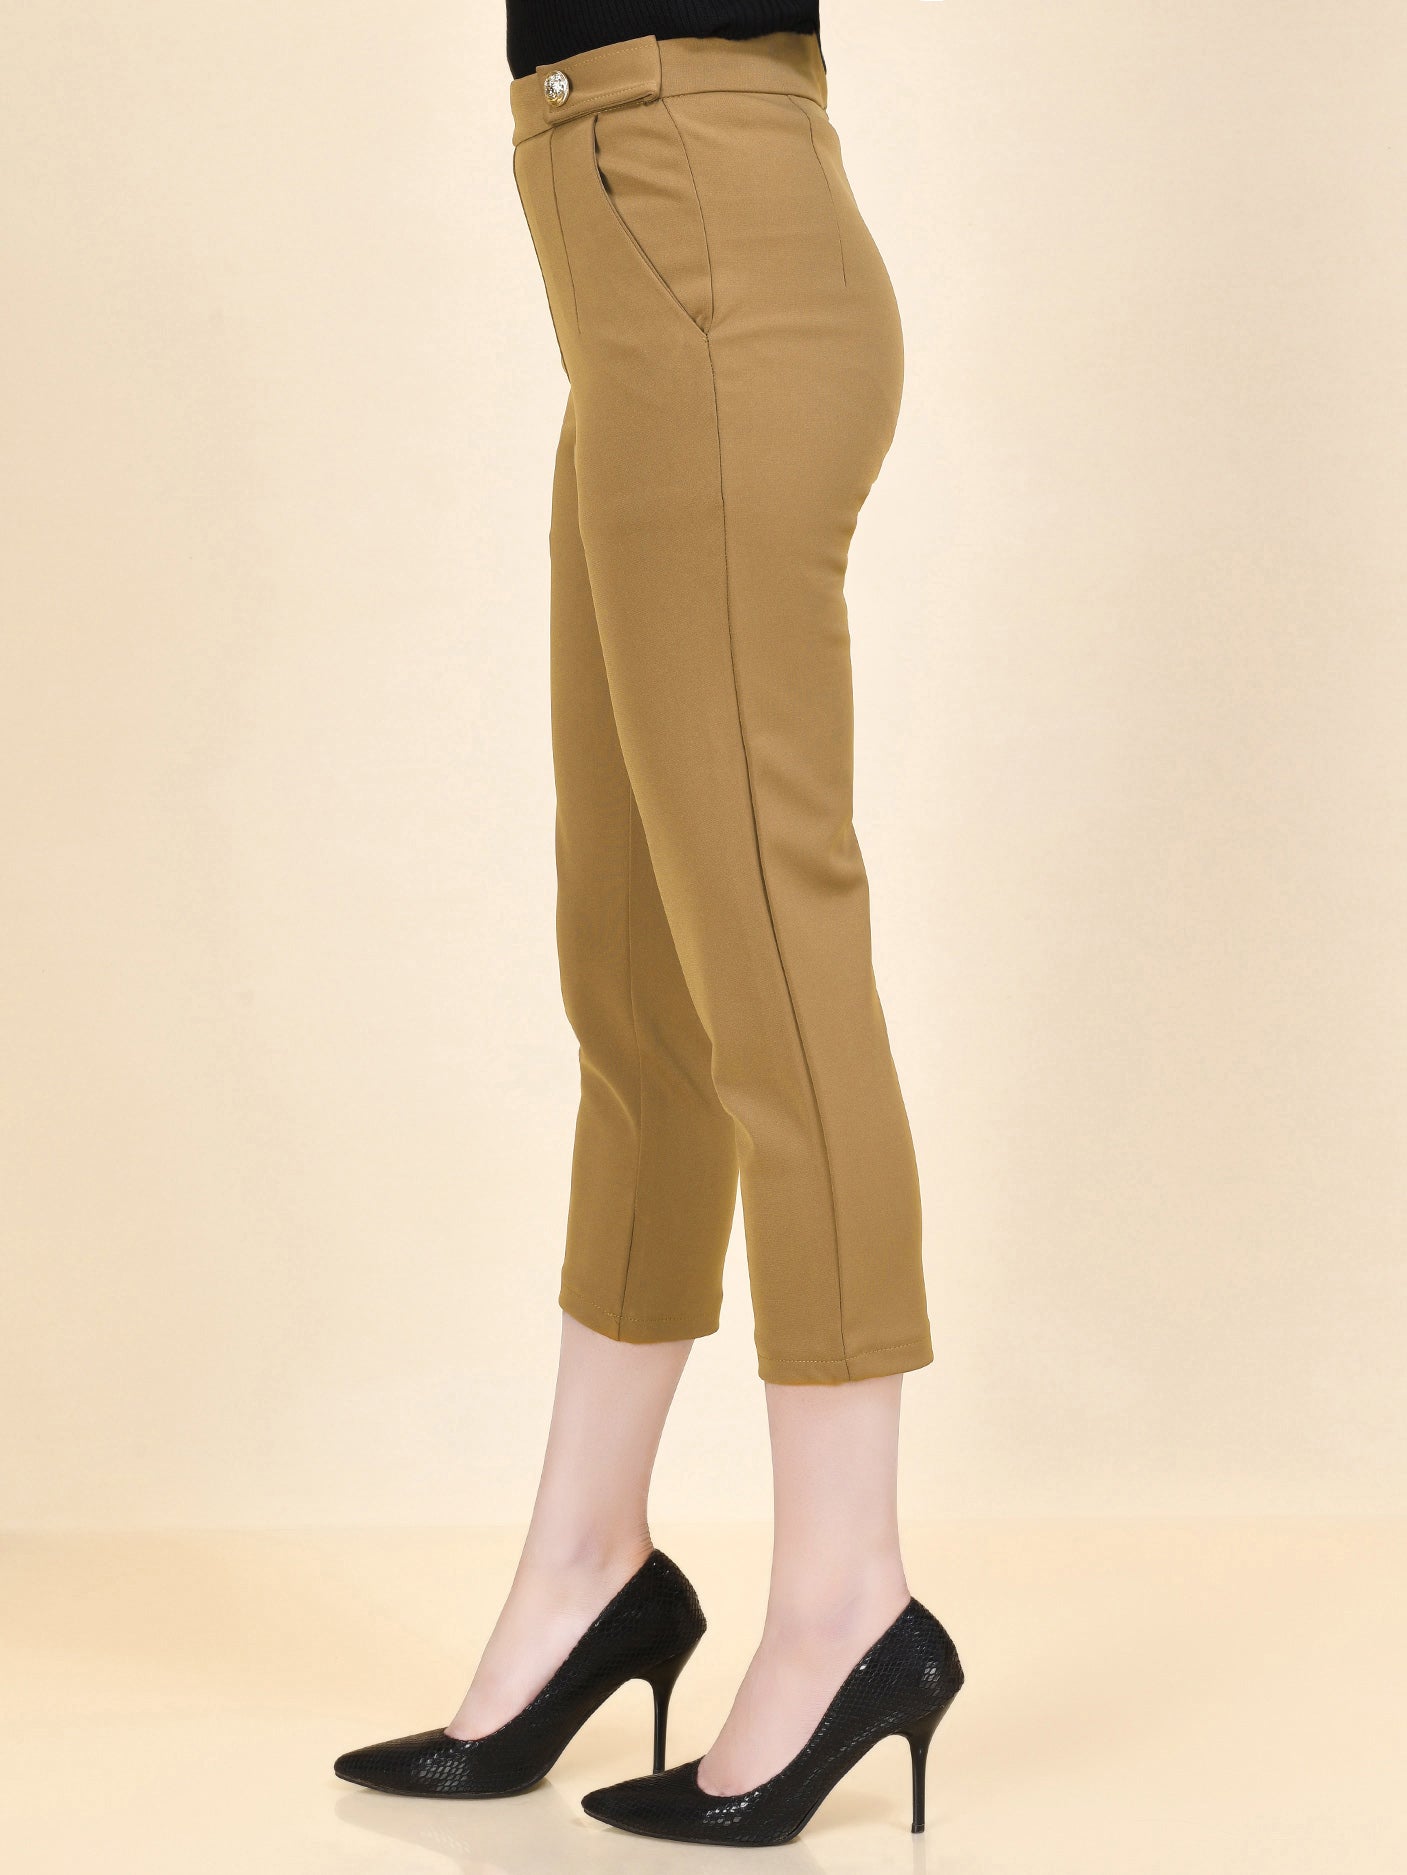 Gold Finish Pants - Brown